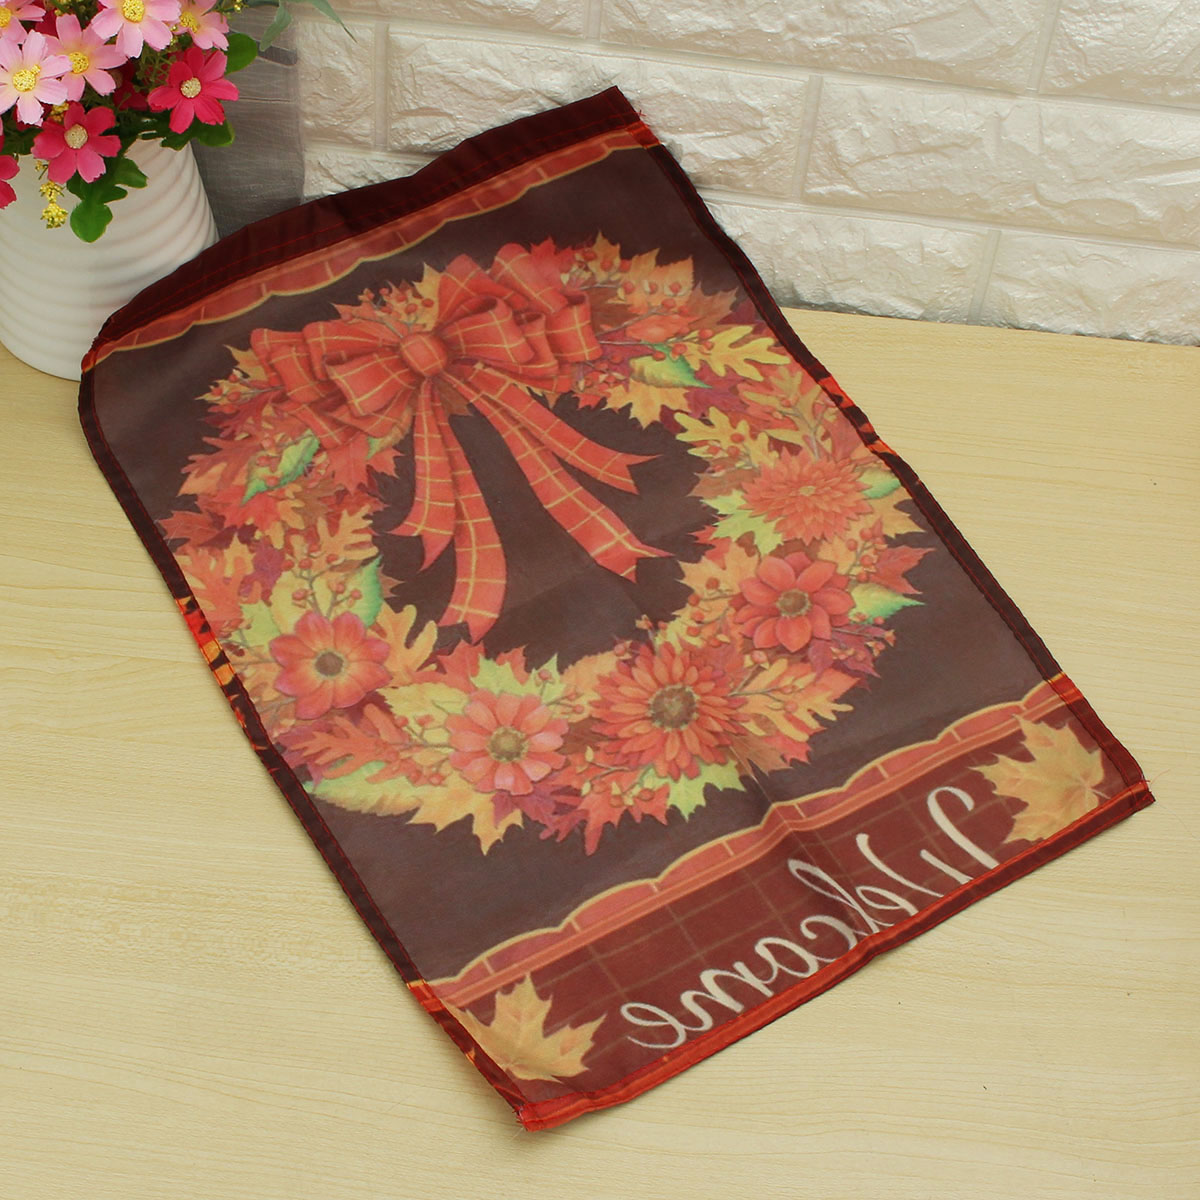 125x18-Fall-Wreath-Garden-Flag-Welcome-Autumn-Leaves-Floral-Briarwood-Lane-Decorations-1343584-3